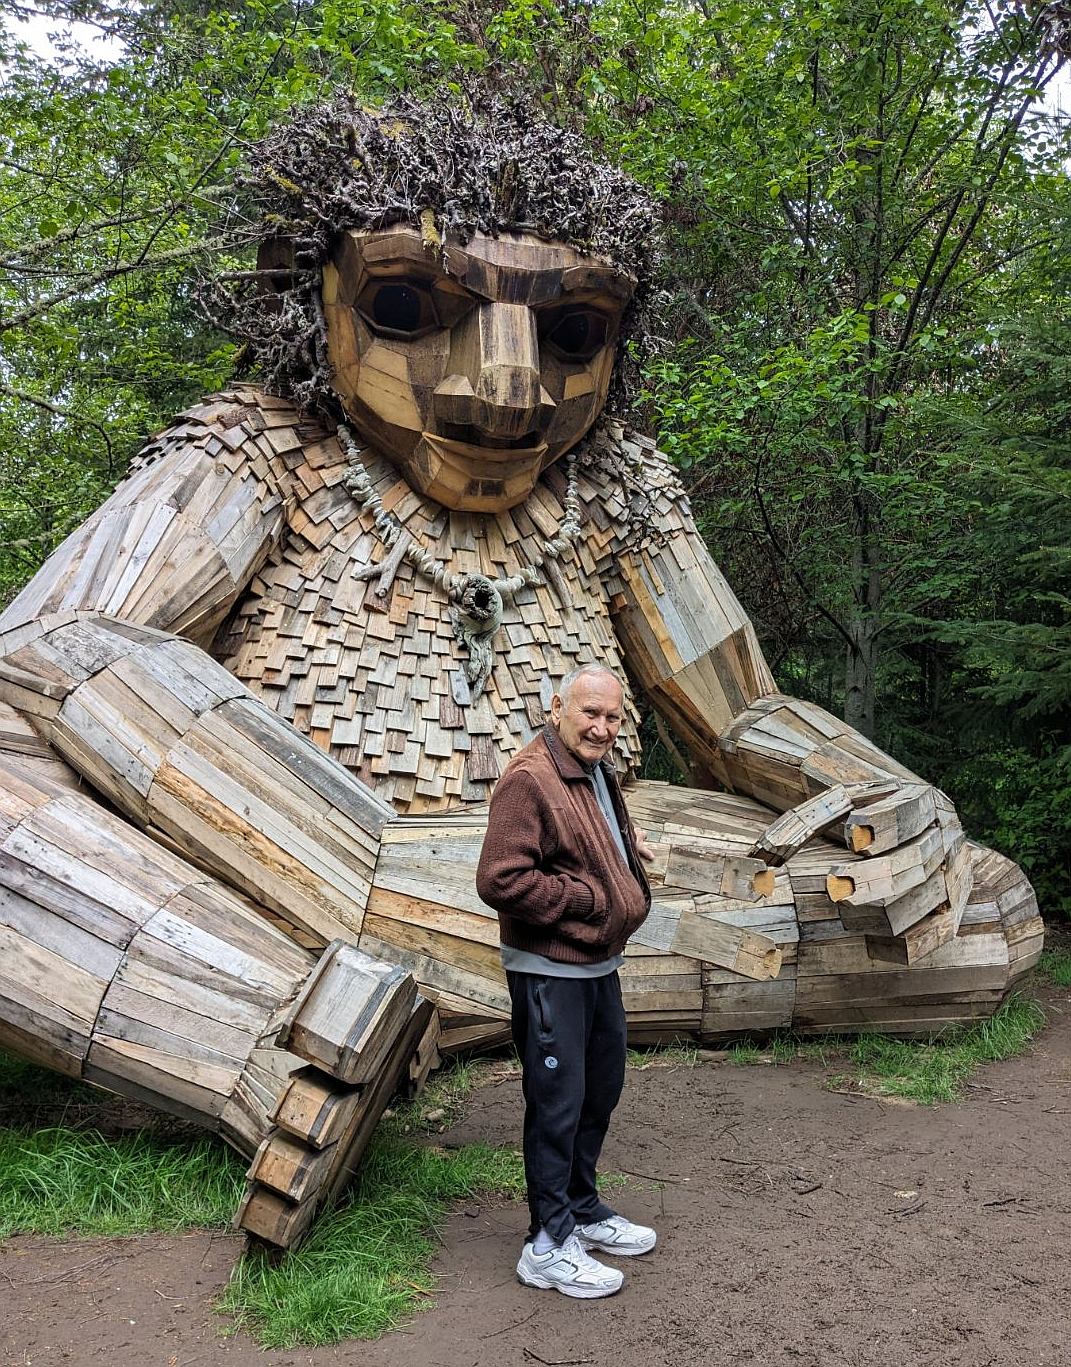 Roger with the Bainbridge Island troll, named Pia the Peacekeeper, an 18-foot-tall art installation awaiting discovery at Sakai Park